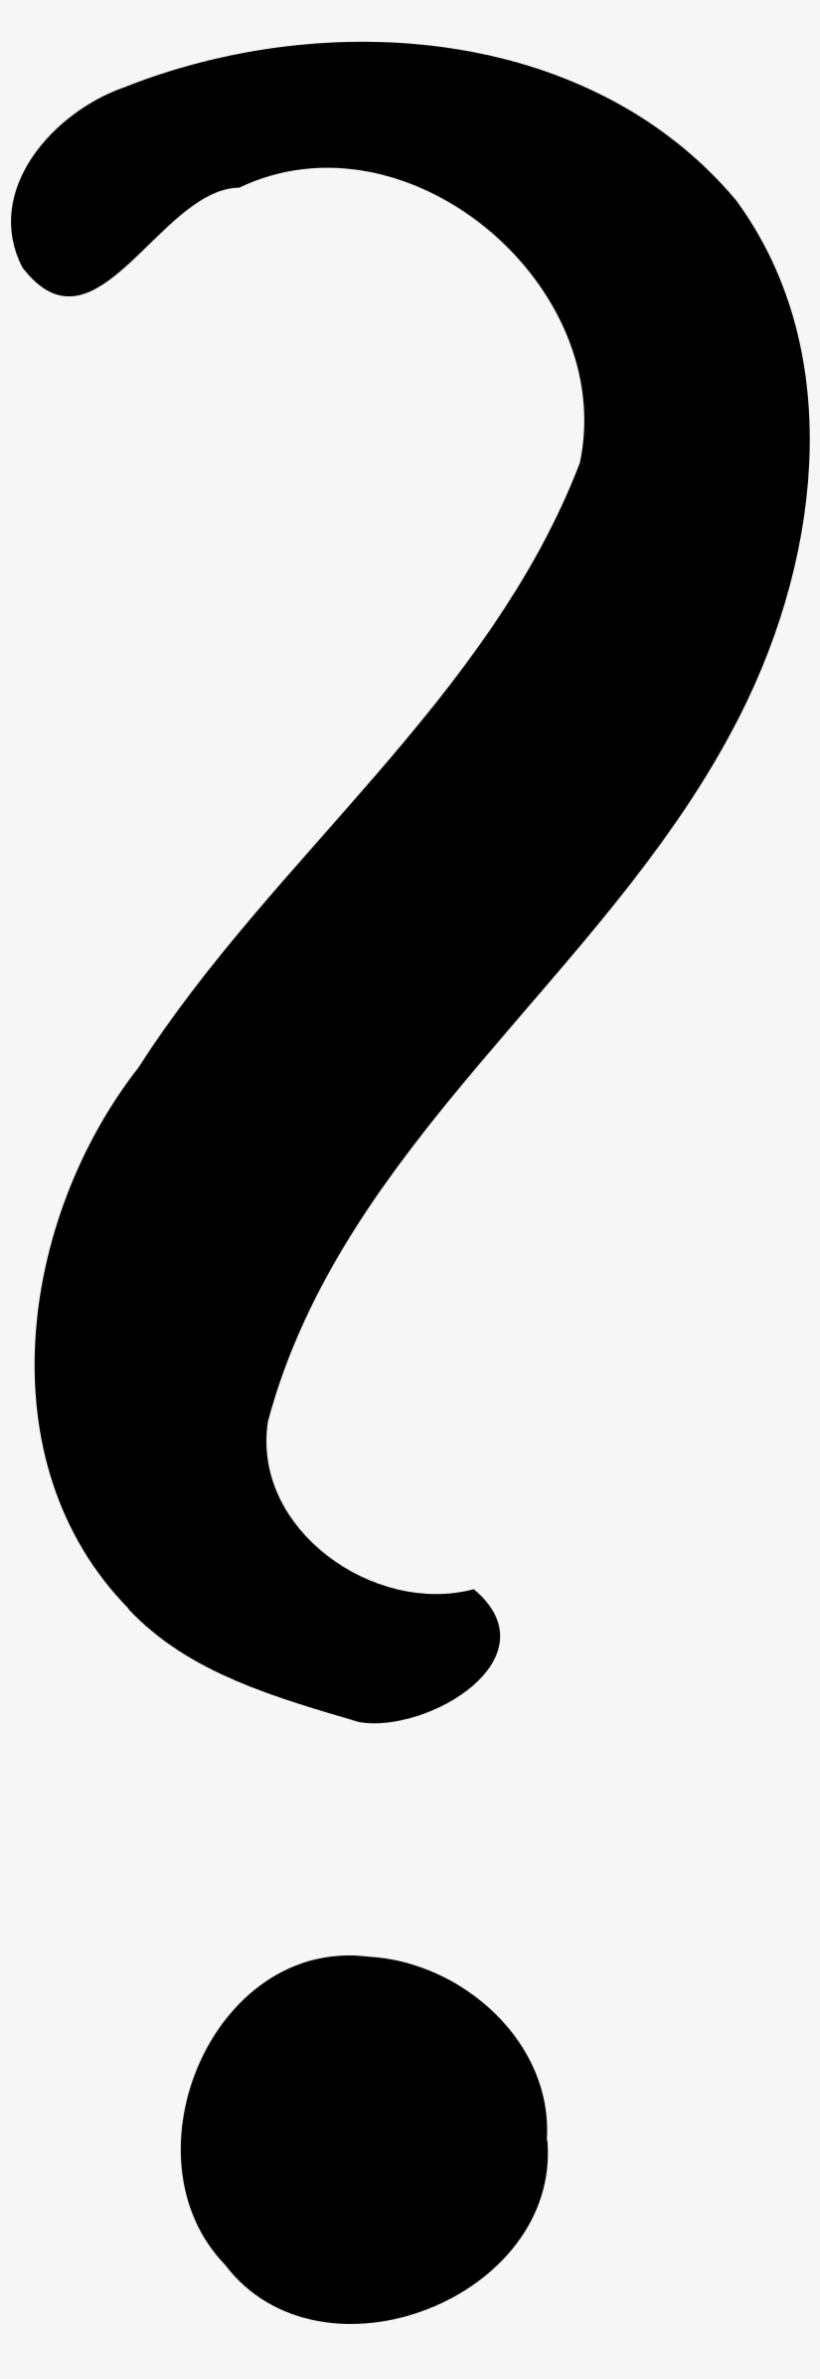 Open - Question Mark Icon File, transparent png #784670